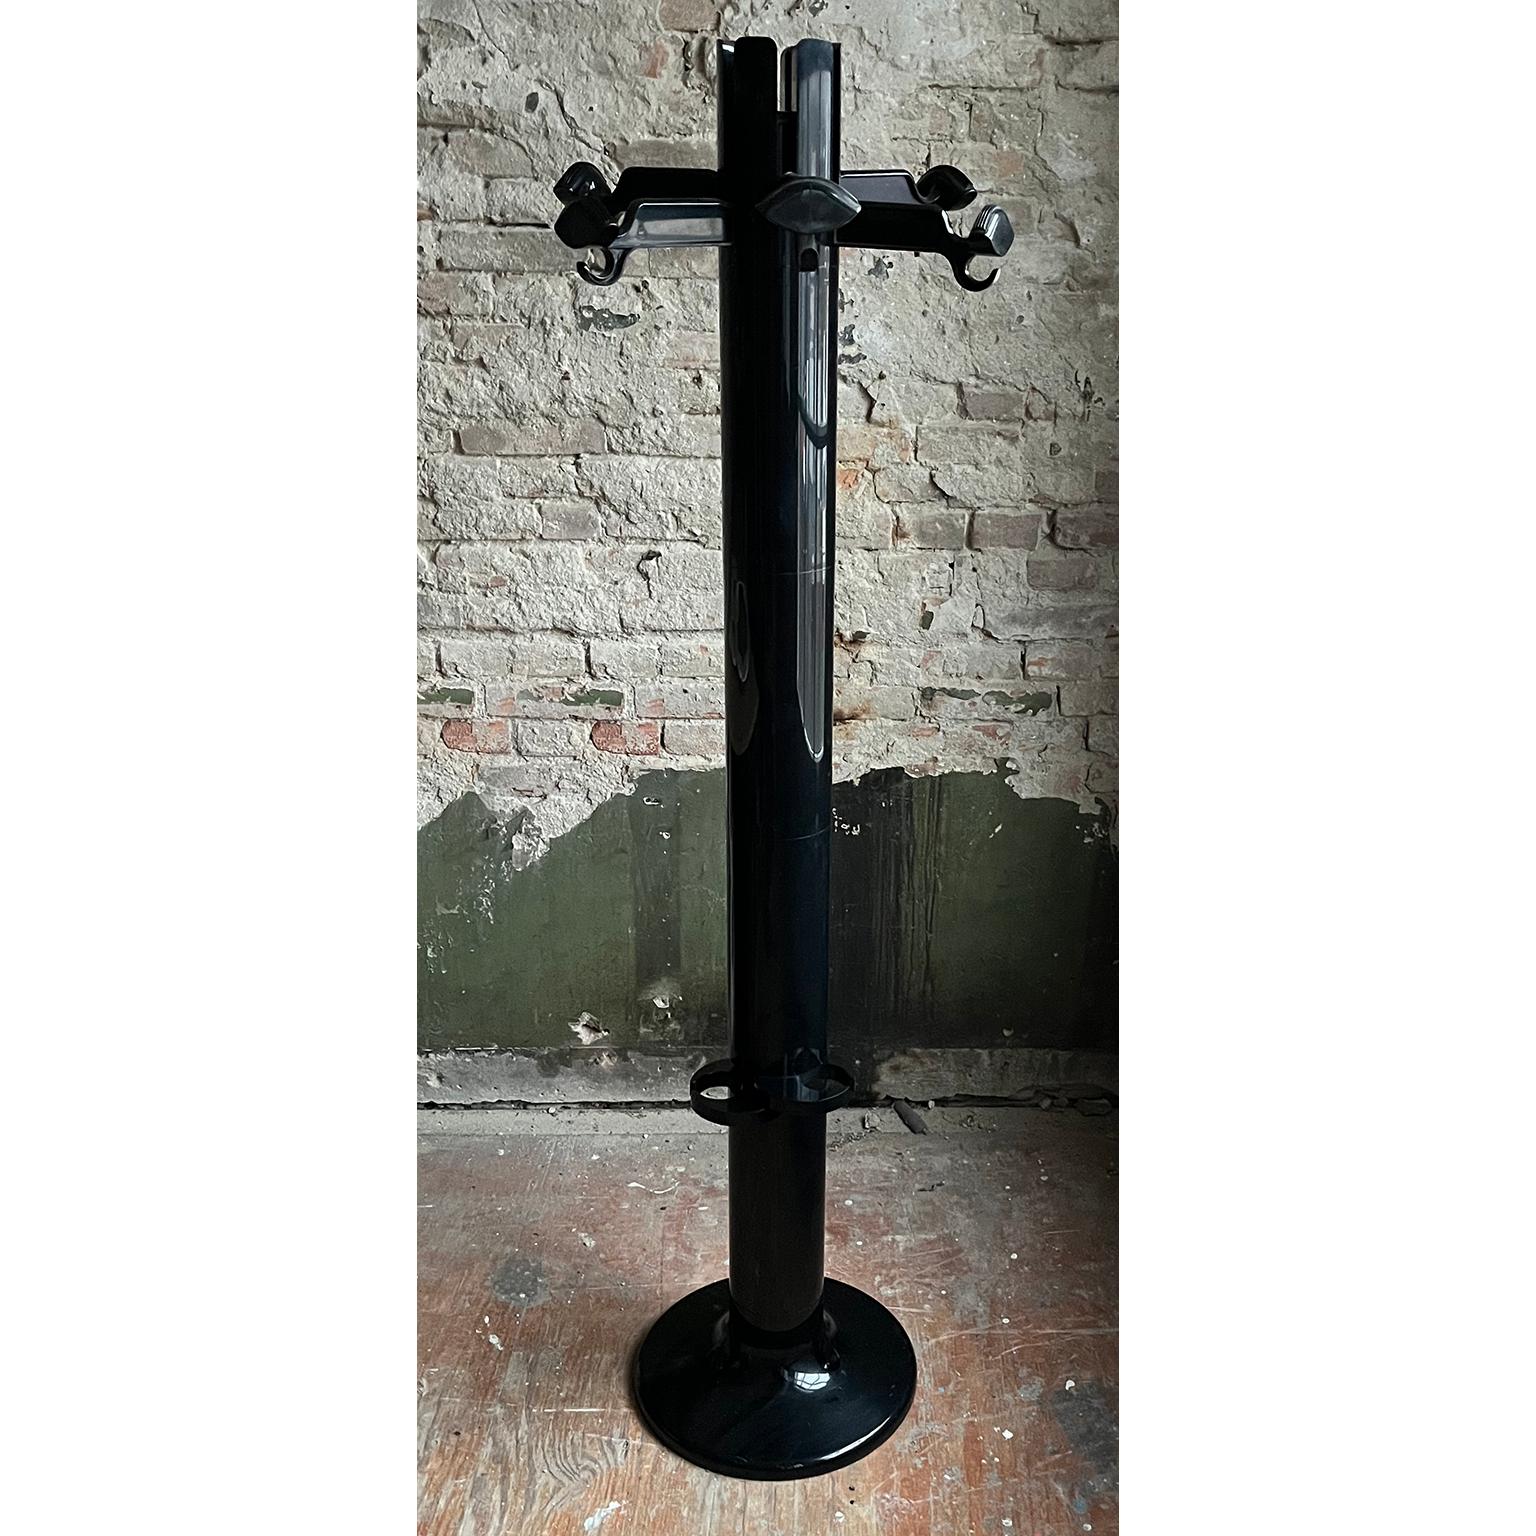 Planta iconic coat rack.

The coat rack hooks, can be set in or out and have multiple functions for hanging coats or clothes in different ways and have an umbrella stand. The coat rack show traces of use like some scratches and spots. Due to